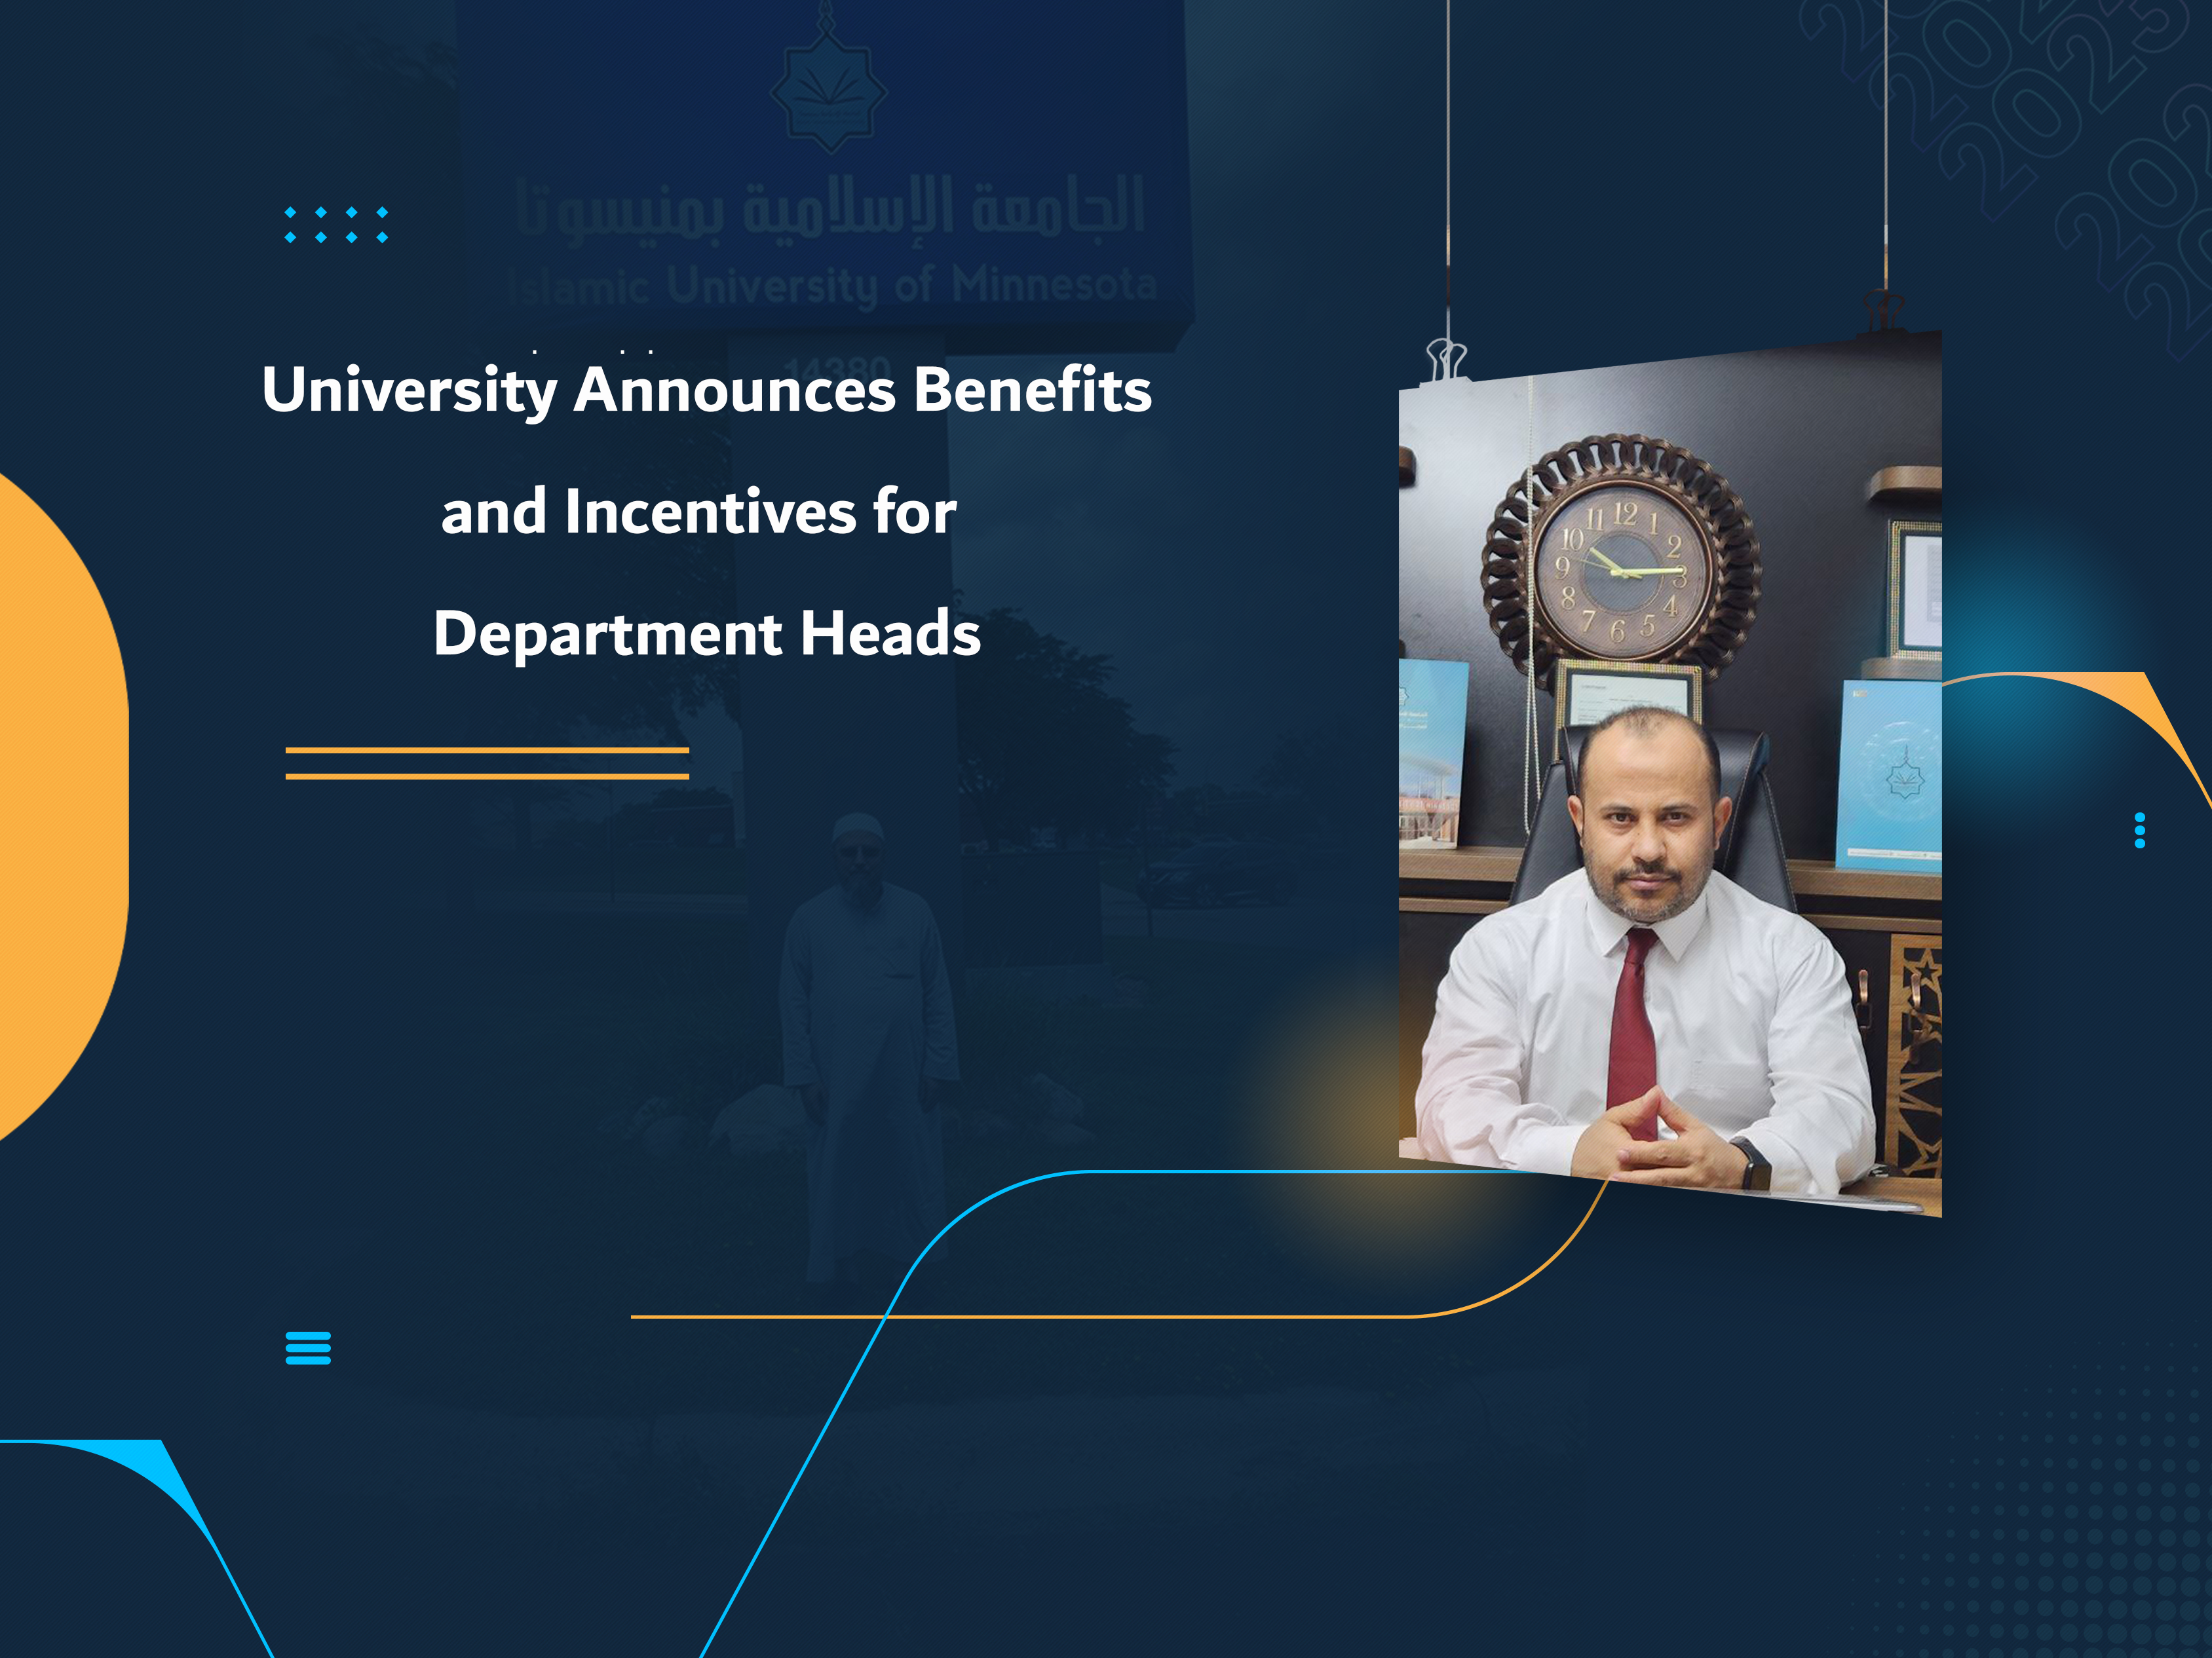 University Announces Benefits and Incentives for Department Heads